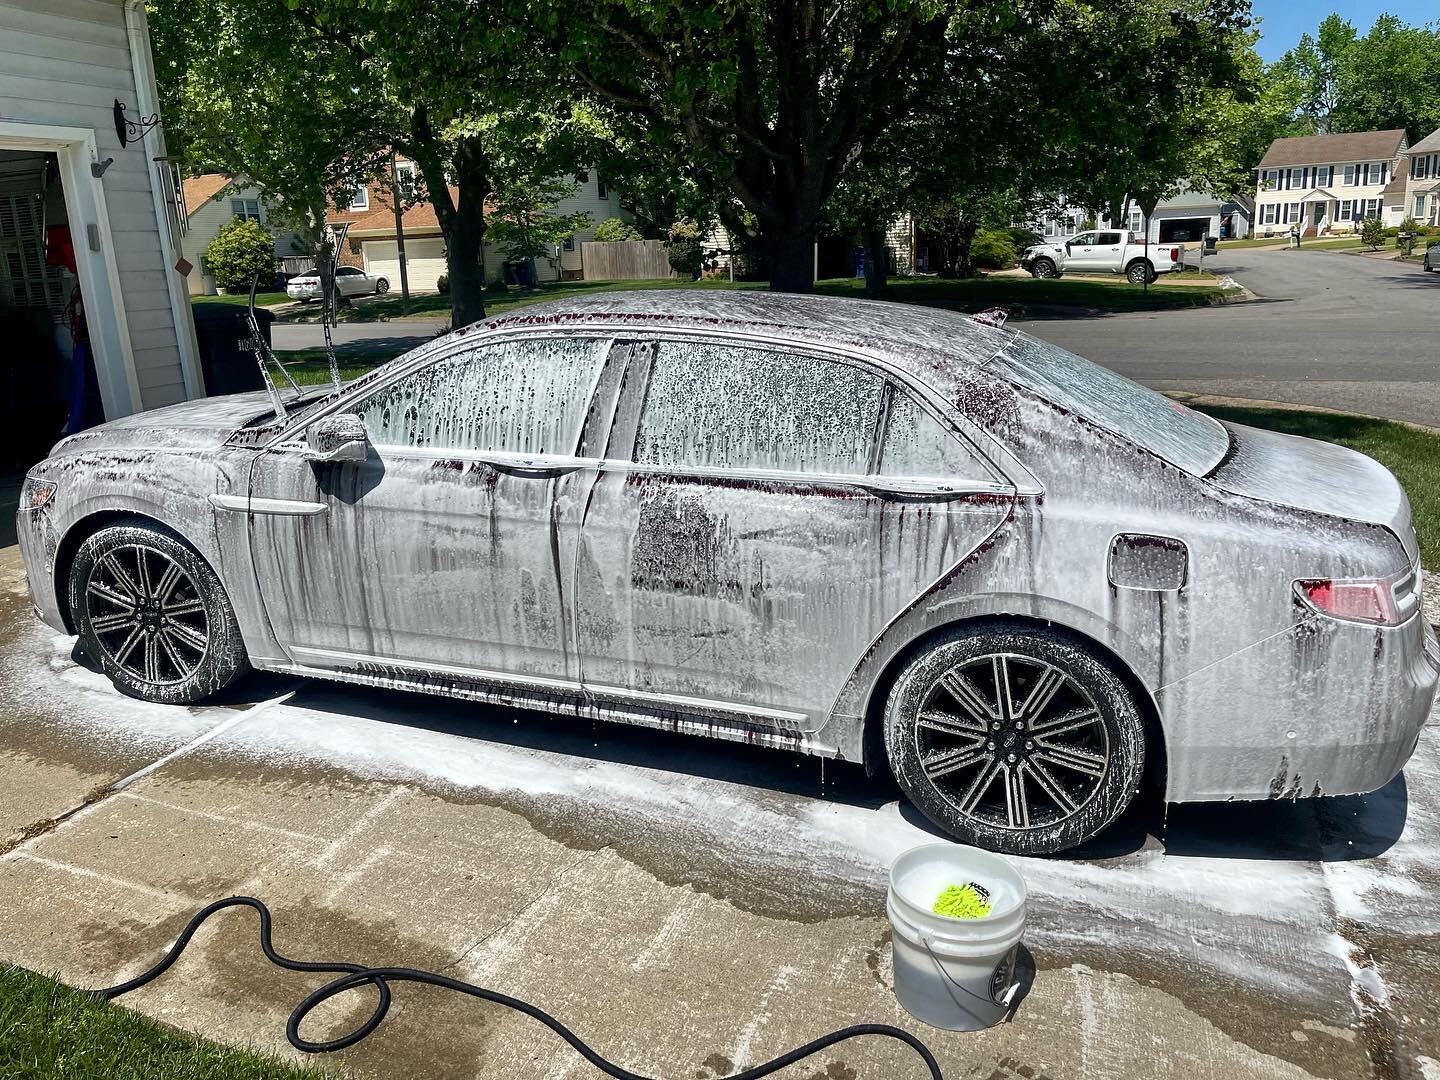 Foam bath helps to soften/remove some of the dirt and grime from the vehicle&rsquo;s exterior before the contact hand wash.

&ldquo;Revitalize your ride, refresh your soul&rdquo;

#detailing #autodetailing #virginiabeach 
#virginia #cleaning #norfolk